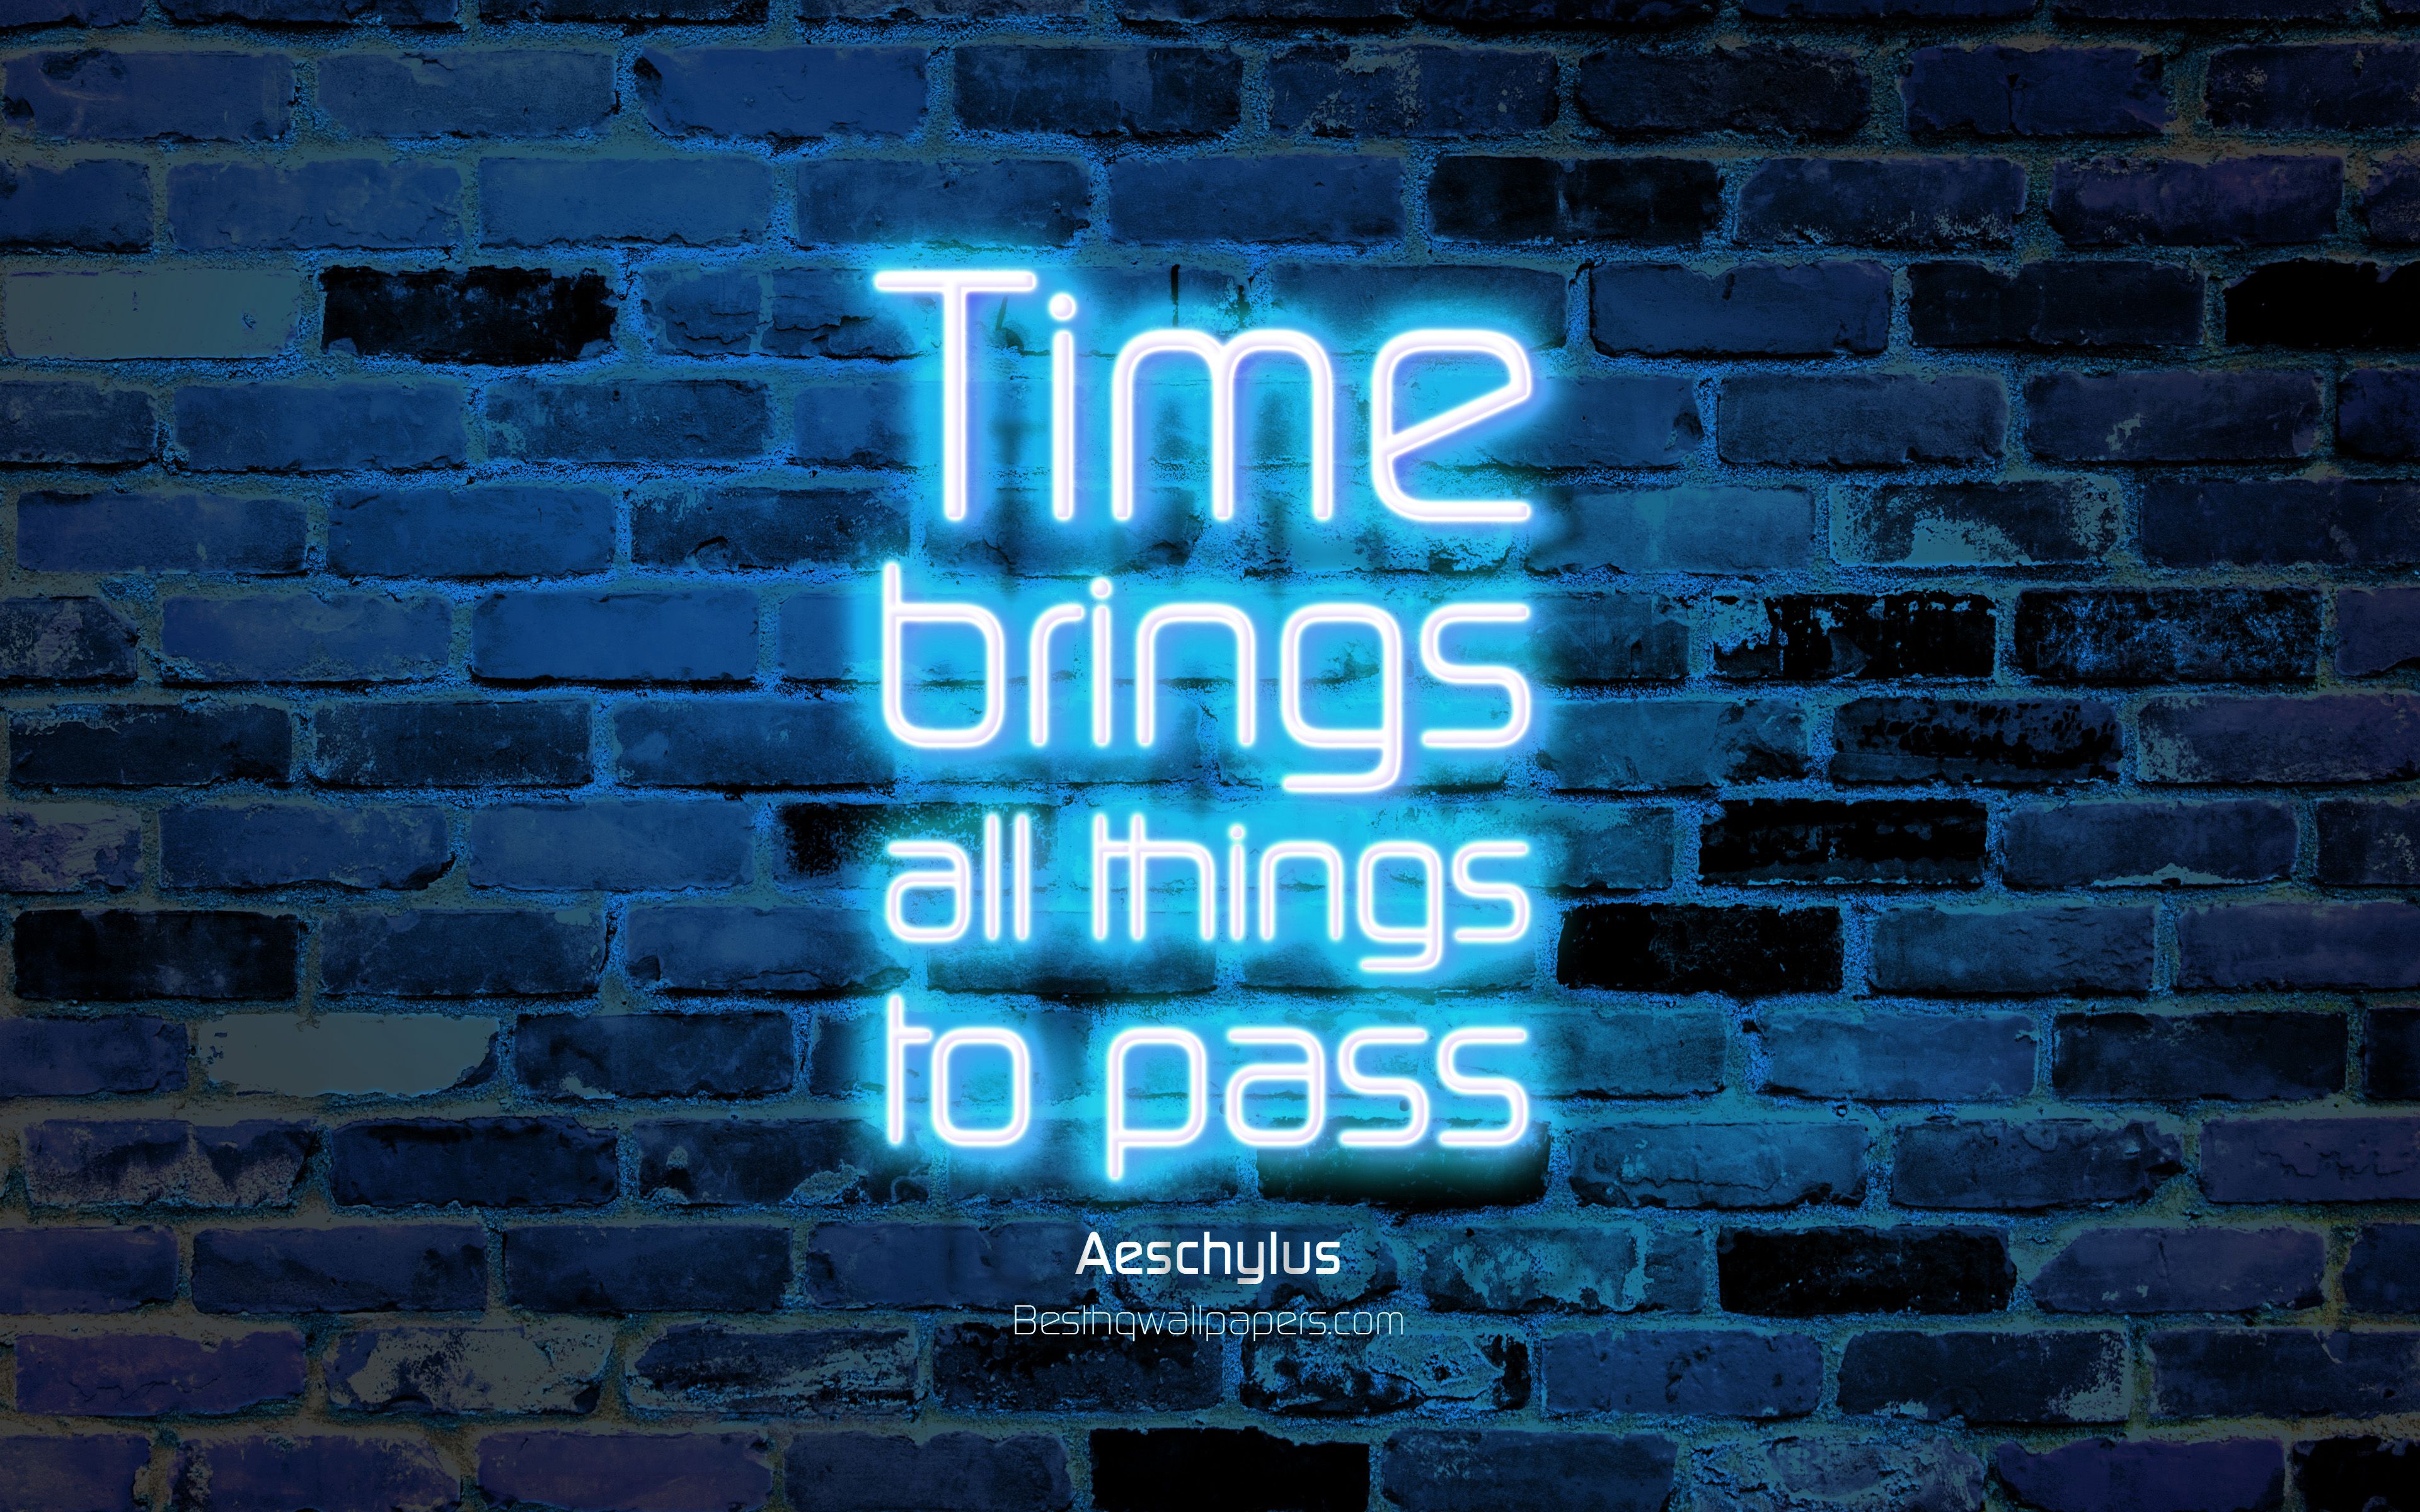 Download wallpaper Time brings all things to pass, 4k, blue brick wall, Aeschylus Quotes, neon text, inspiration, Aeschylus, quotes about time for desktop with resolution 3840x2400. High Quality HD picture wallpaper